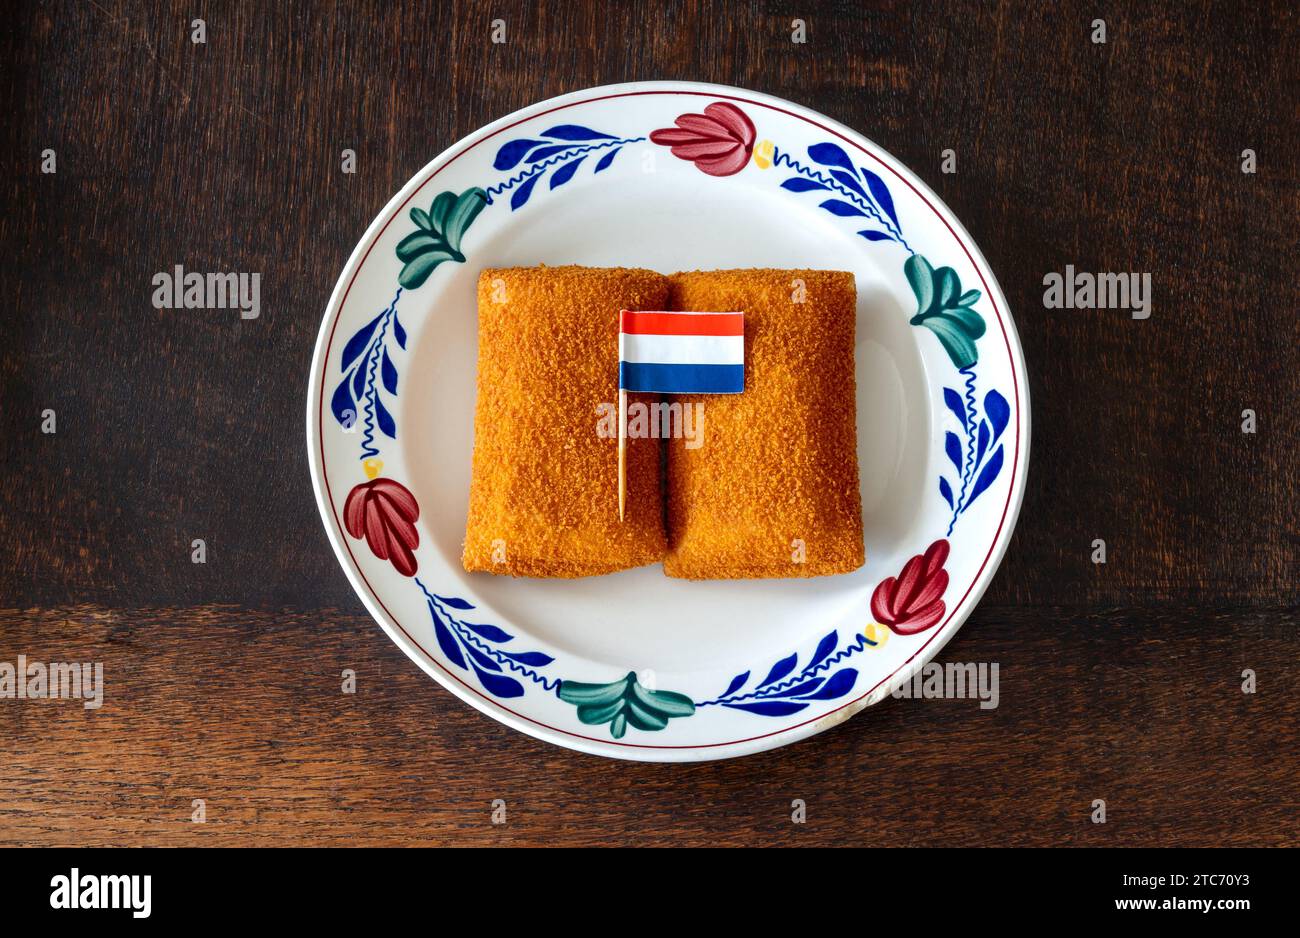 Kaassouffle on the plate with dutch flag, a popular fast food snack consisting of melted cheese inside a breaded and deep fried wrap Stock Photo